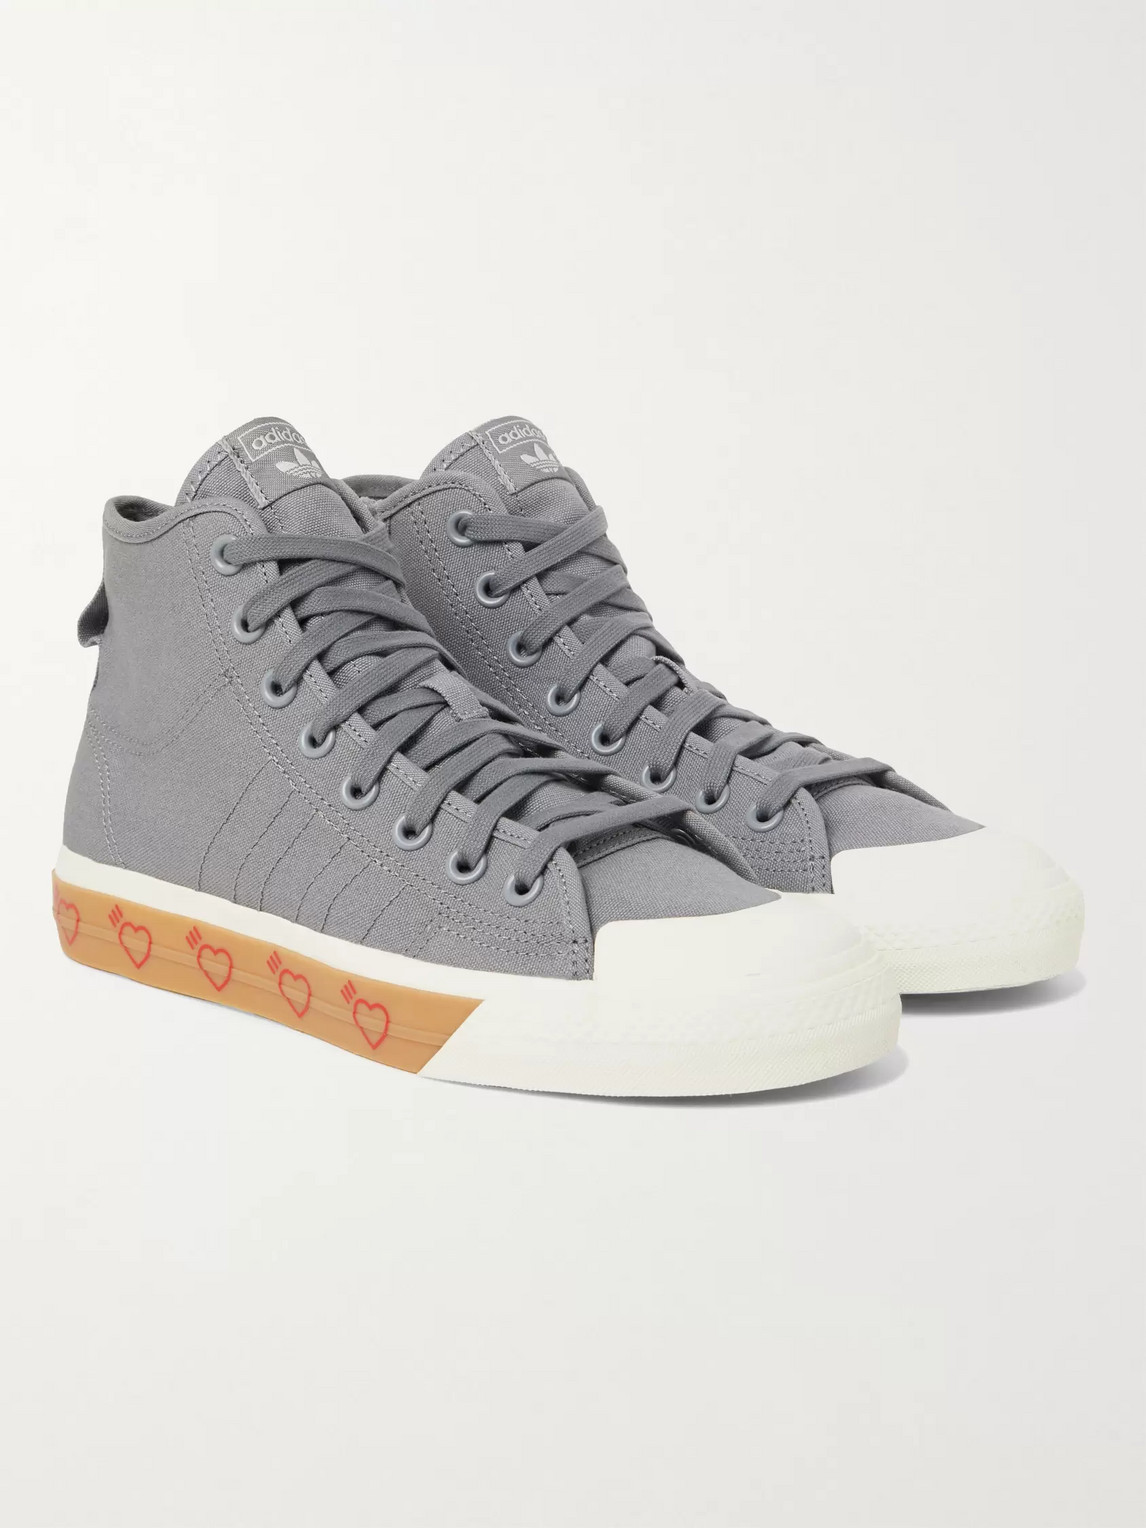 Adidas Consortium Human Made Nizza Canvas High-top Sneakers In Gray